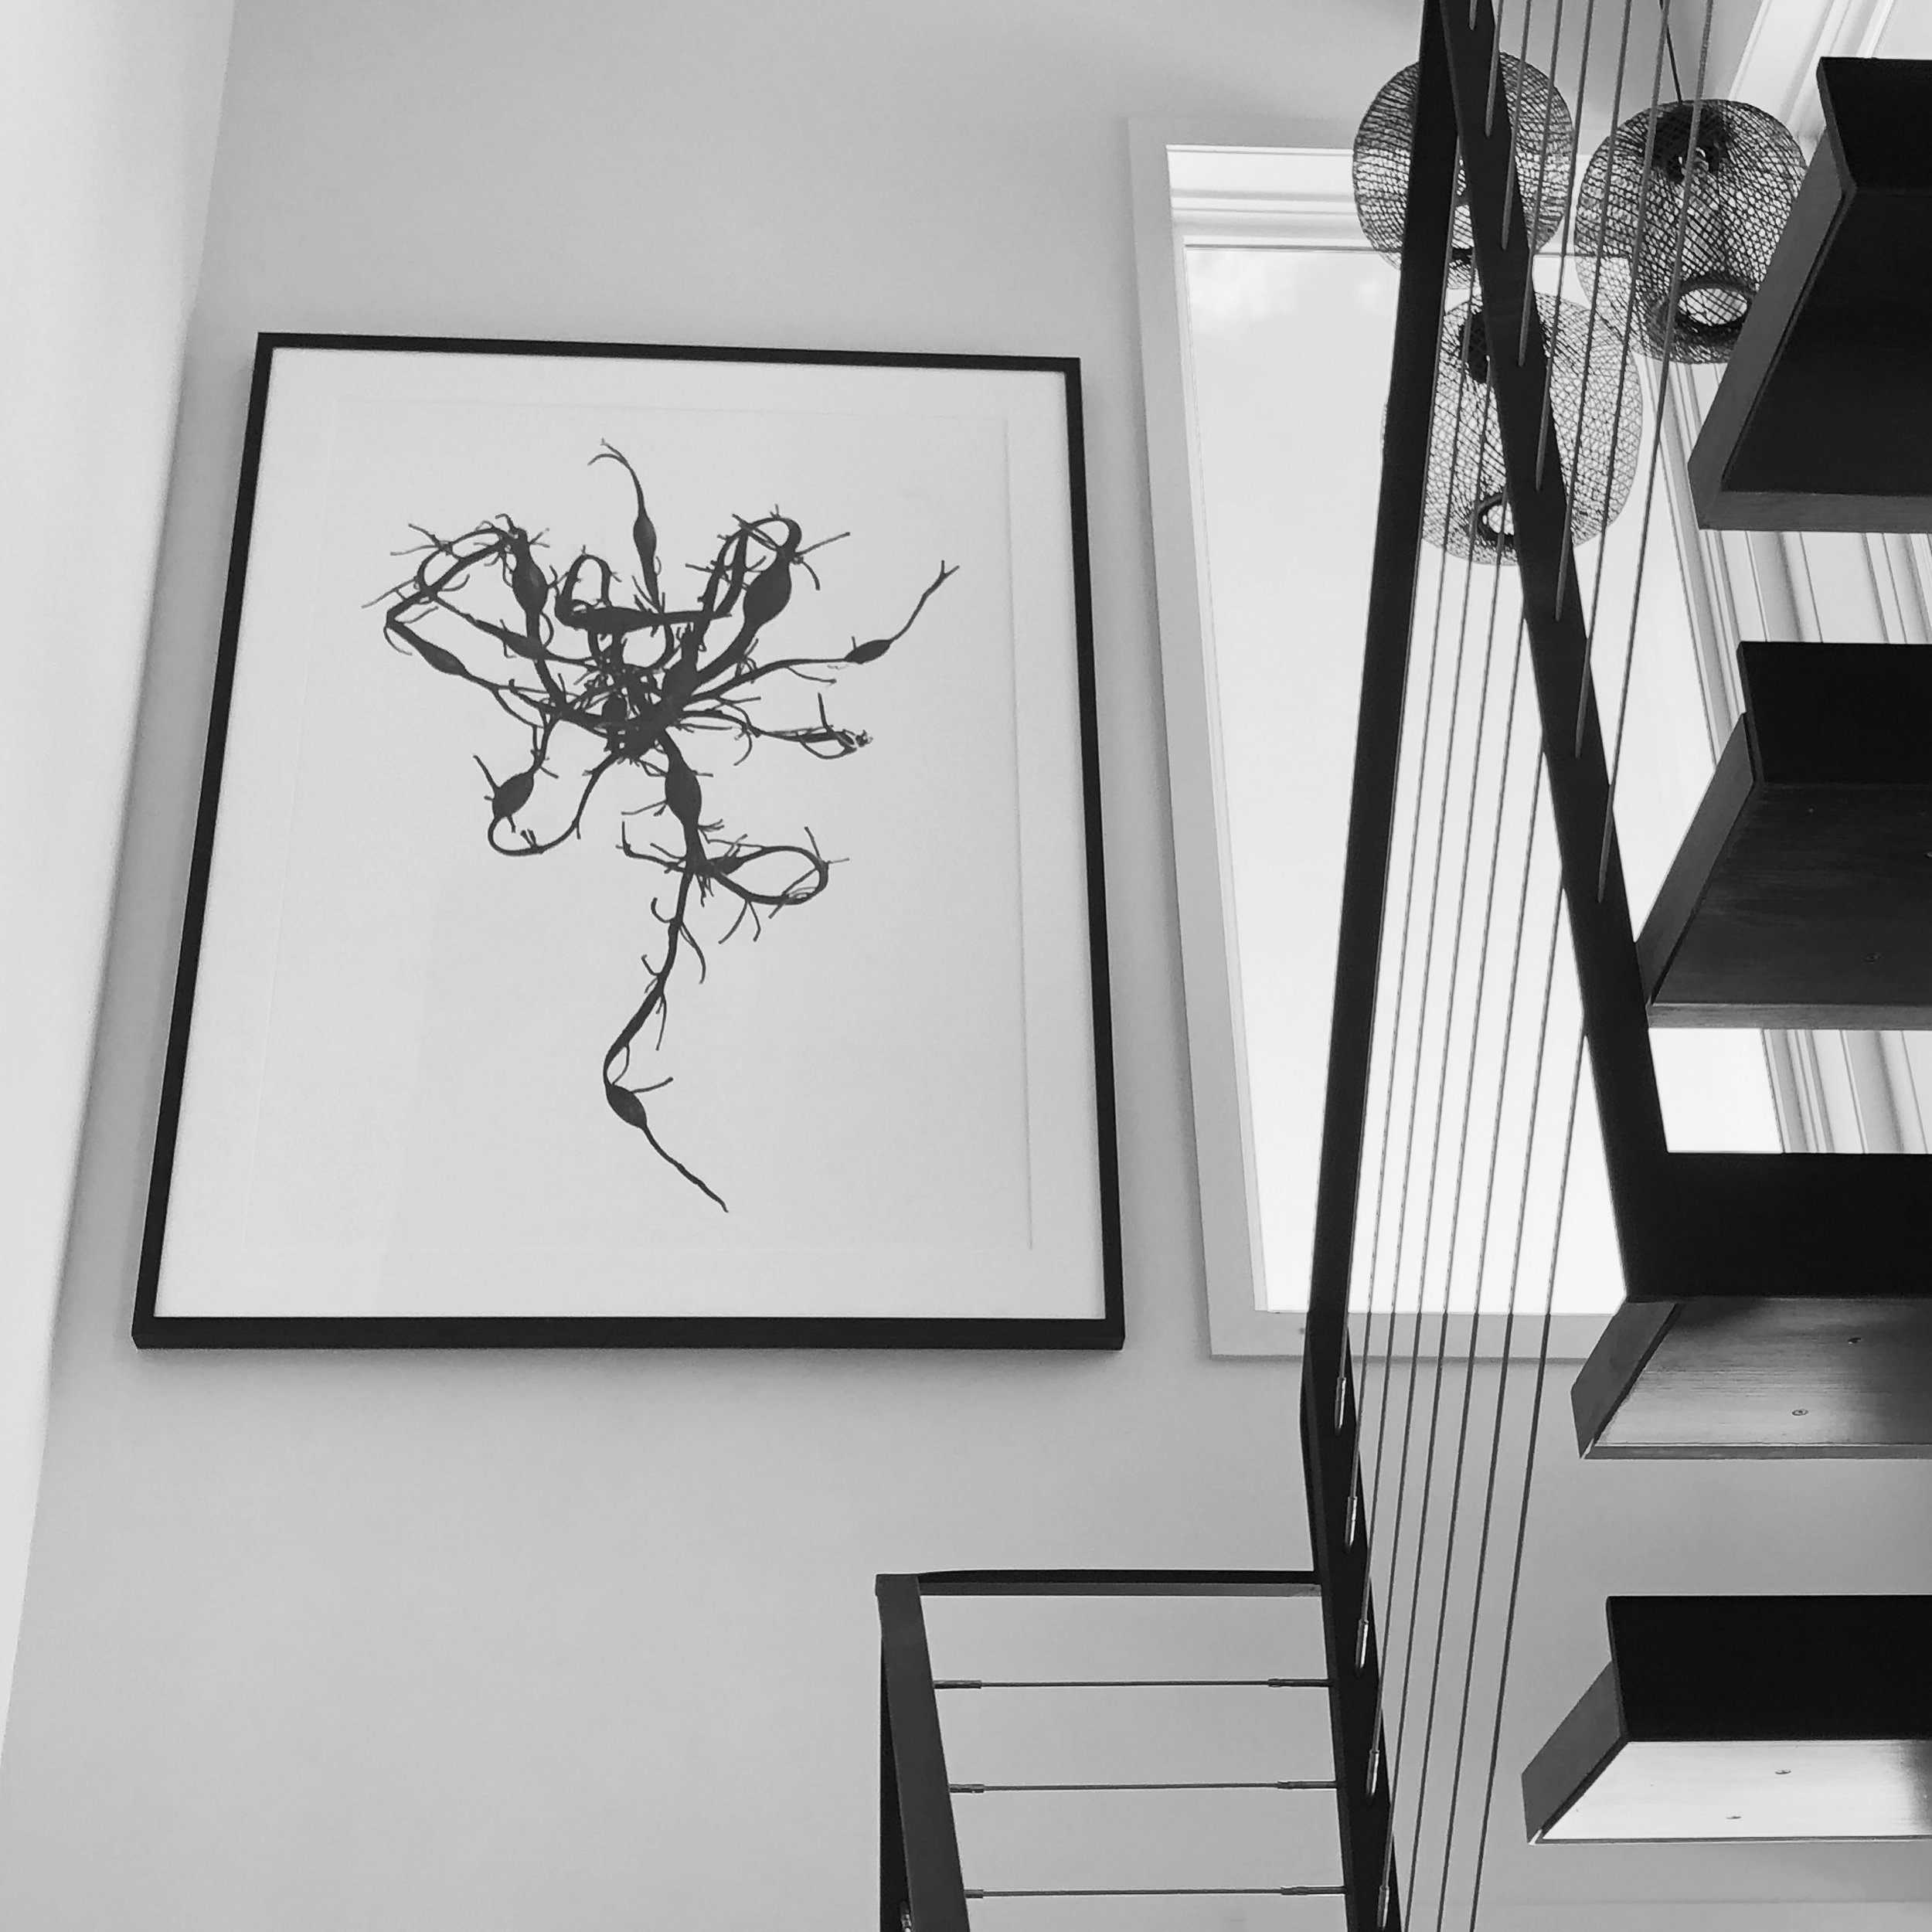 Seaweed 3 in situ, 2019, print, 40 x 60 in, $6,000 (other sizes available)